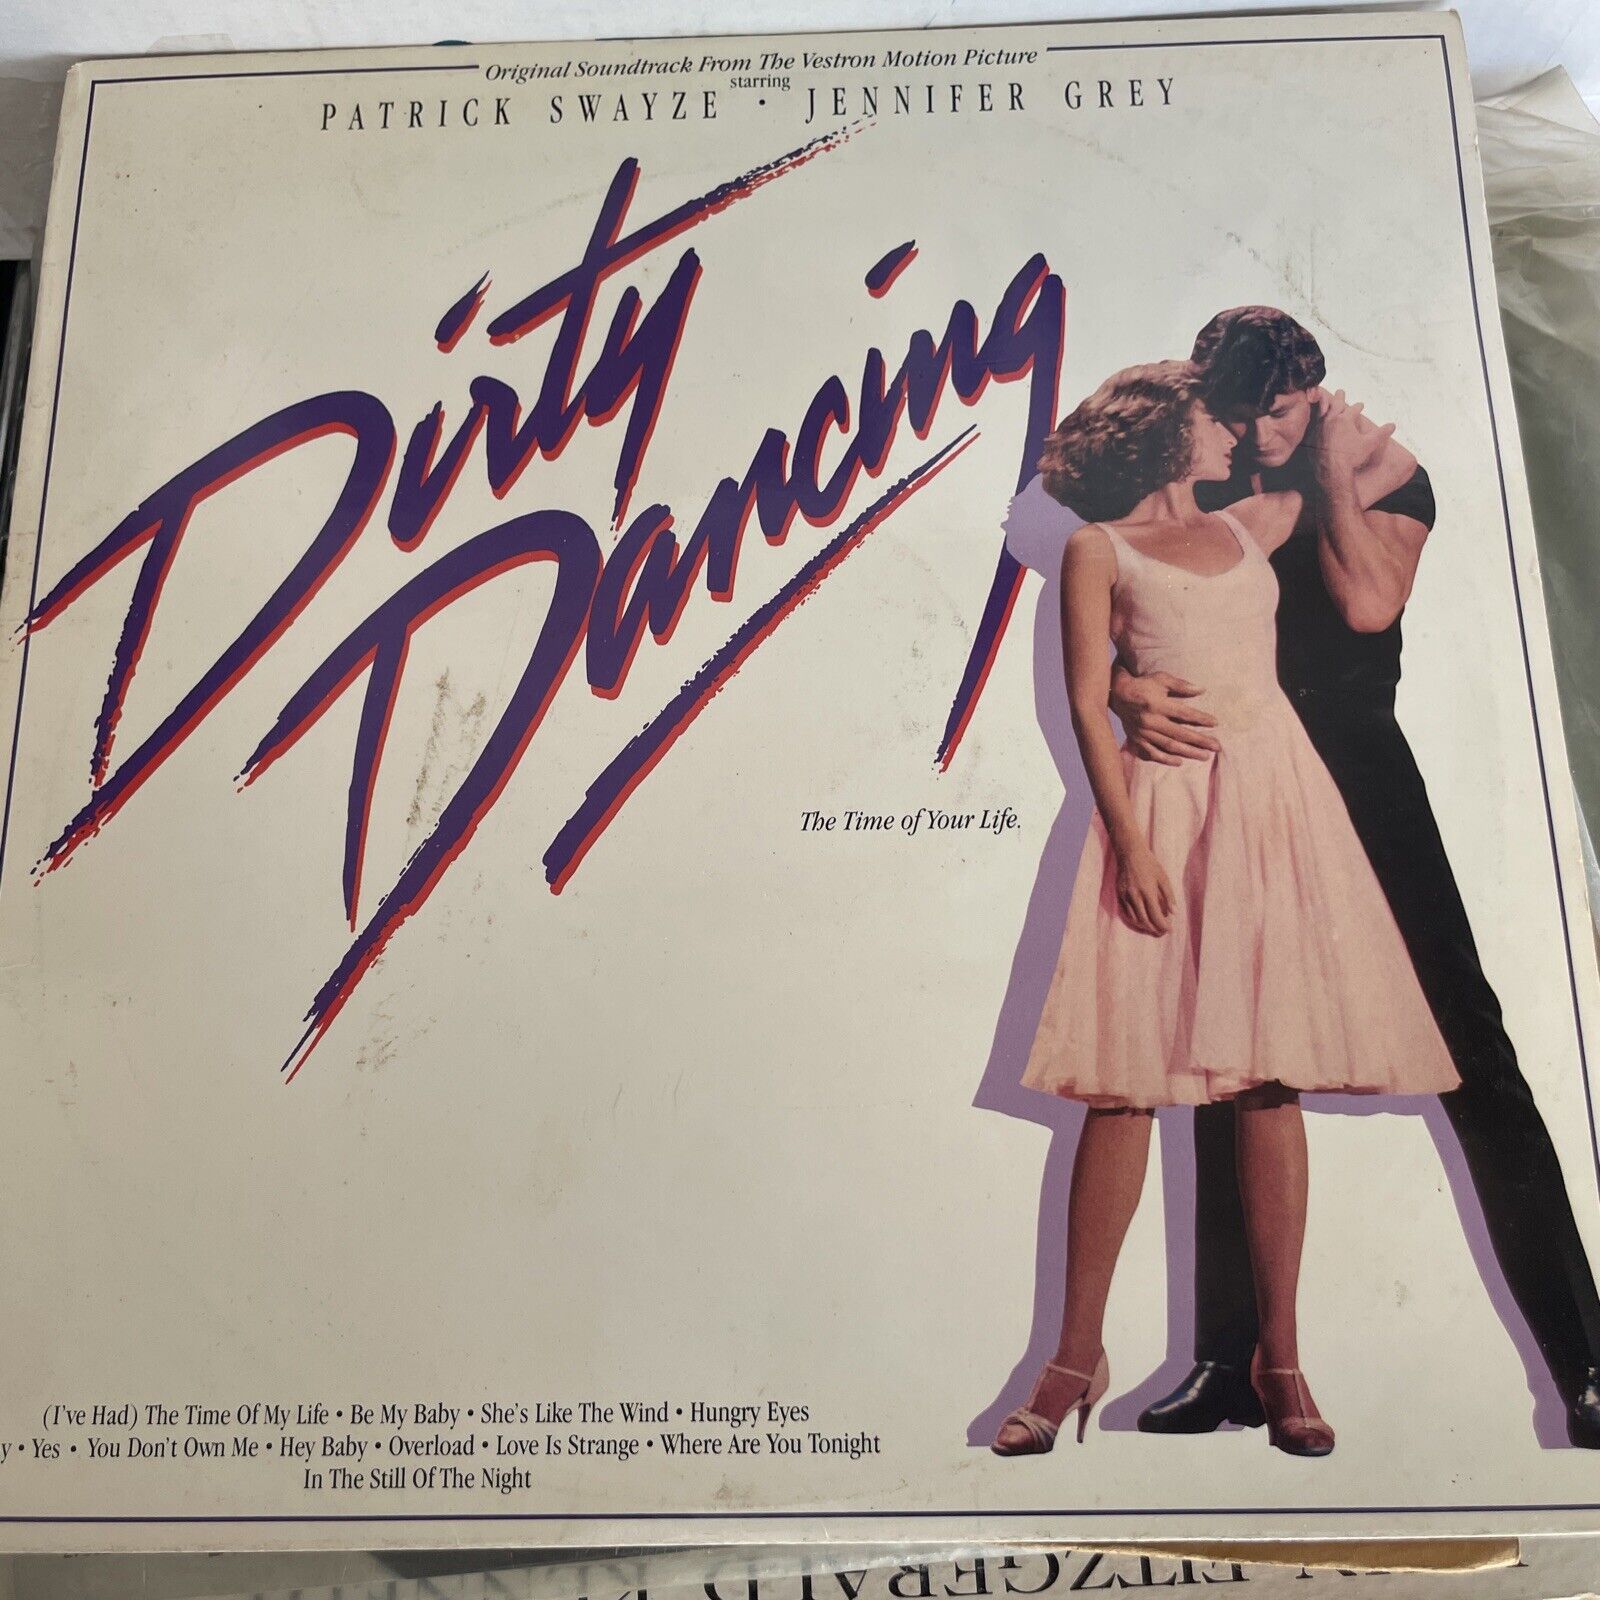 VINTAGE DIRTY DANCING SOUNDTRACK LP (1987) PREVIOUSLY OWNED